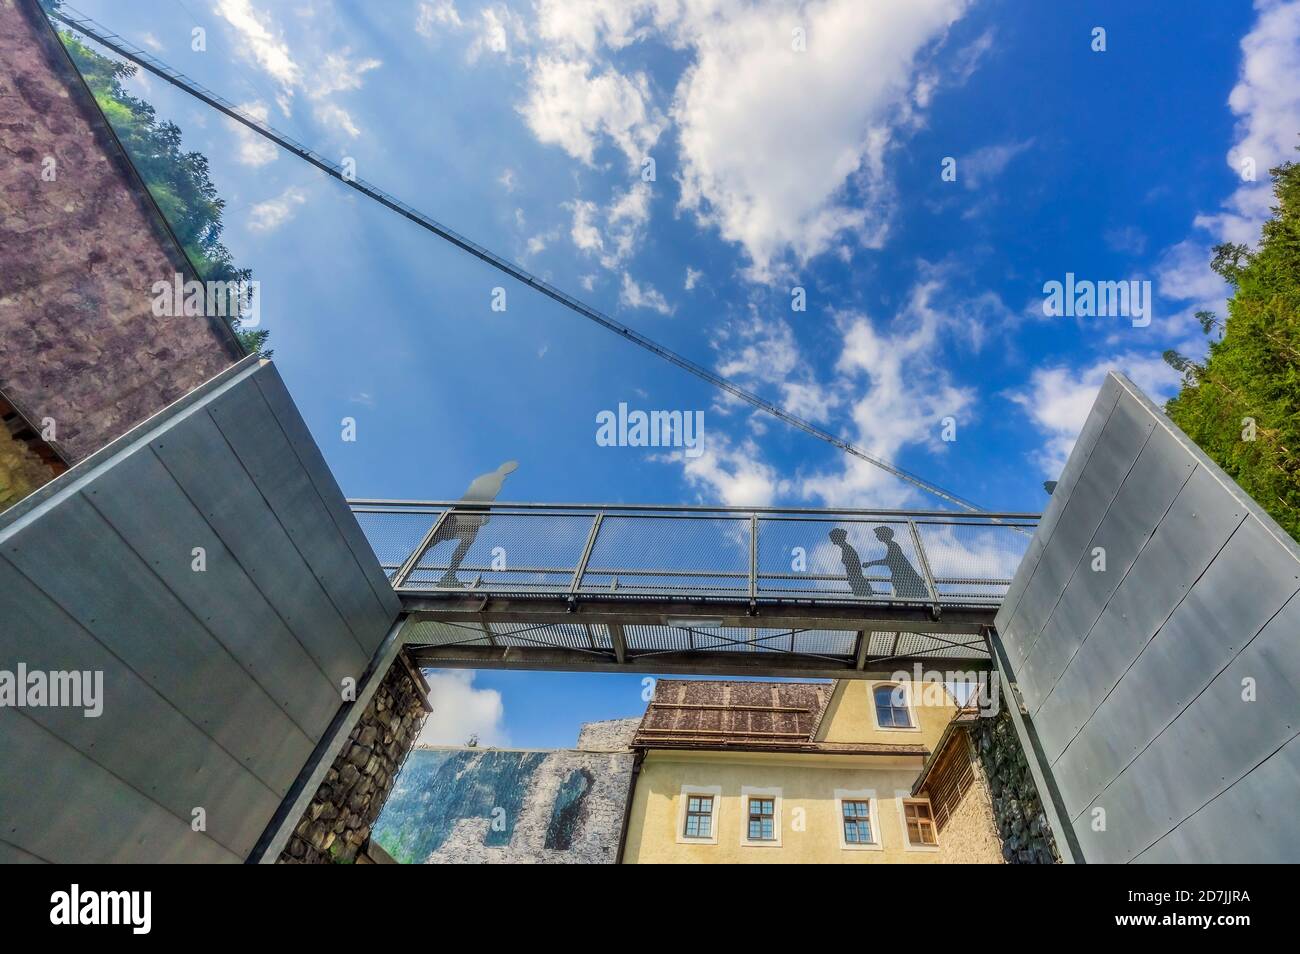 Austria, Tyrol, Reutte, Highline179 stretching over elevated walkway Stock Photo